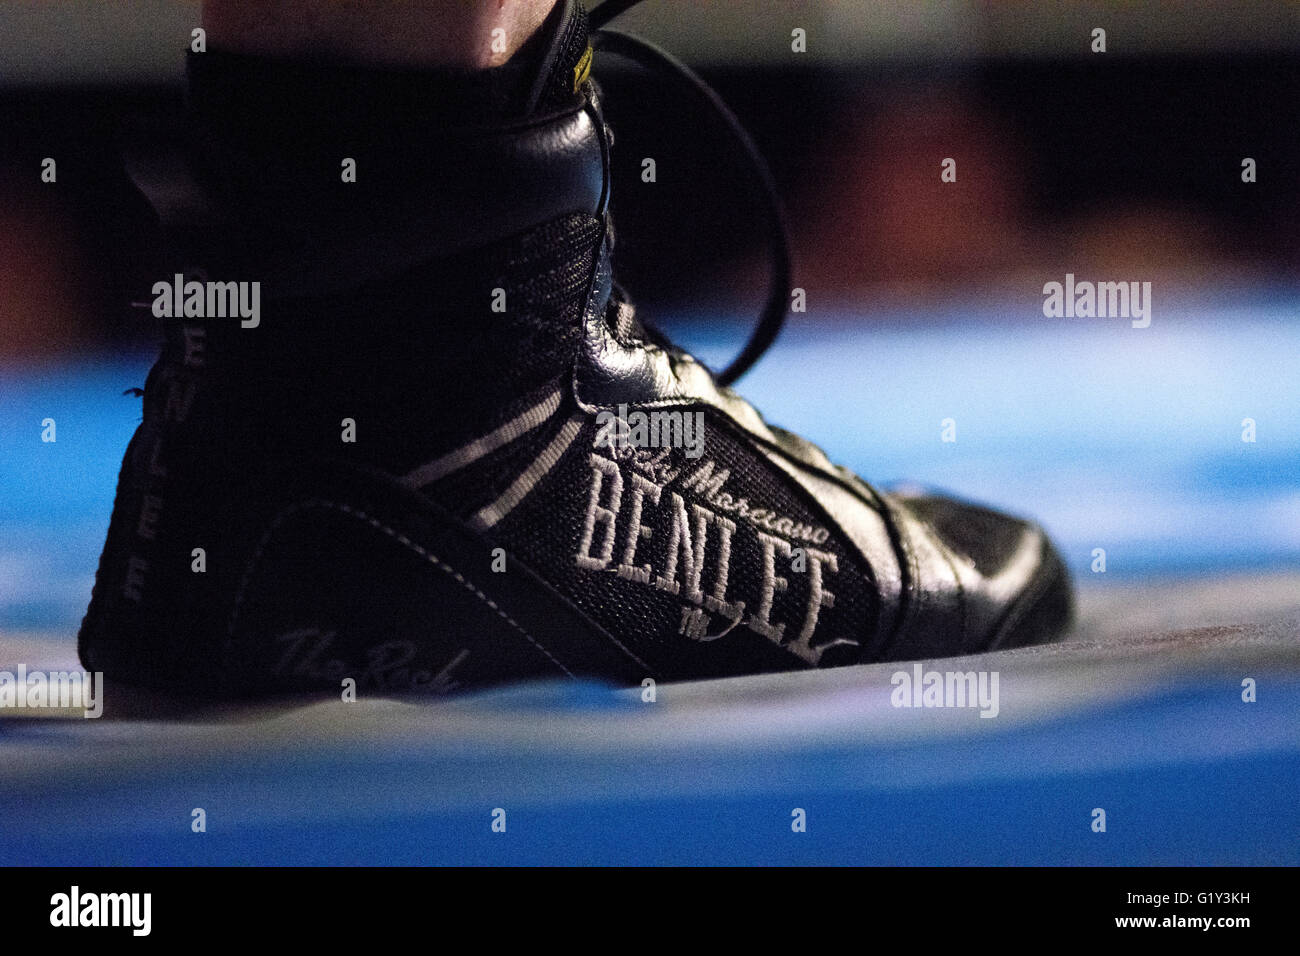 Gijon, Spain. 21st May, 2016. Shoes of Spanish boxer Jose Fandiño during the fourth boxing match against Armenian boxer Adibek Artenyan of the fight night of Spanish national featherweight boxing championships at Sports Center on May 21, 2016 in Gijon, Spain. Credit: David Gato/Alamy Live News Stock Photo